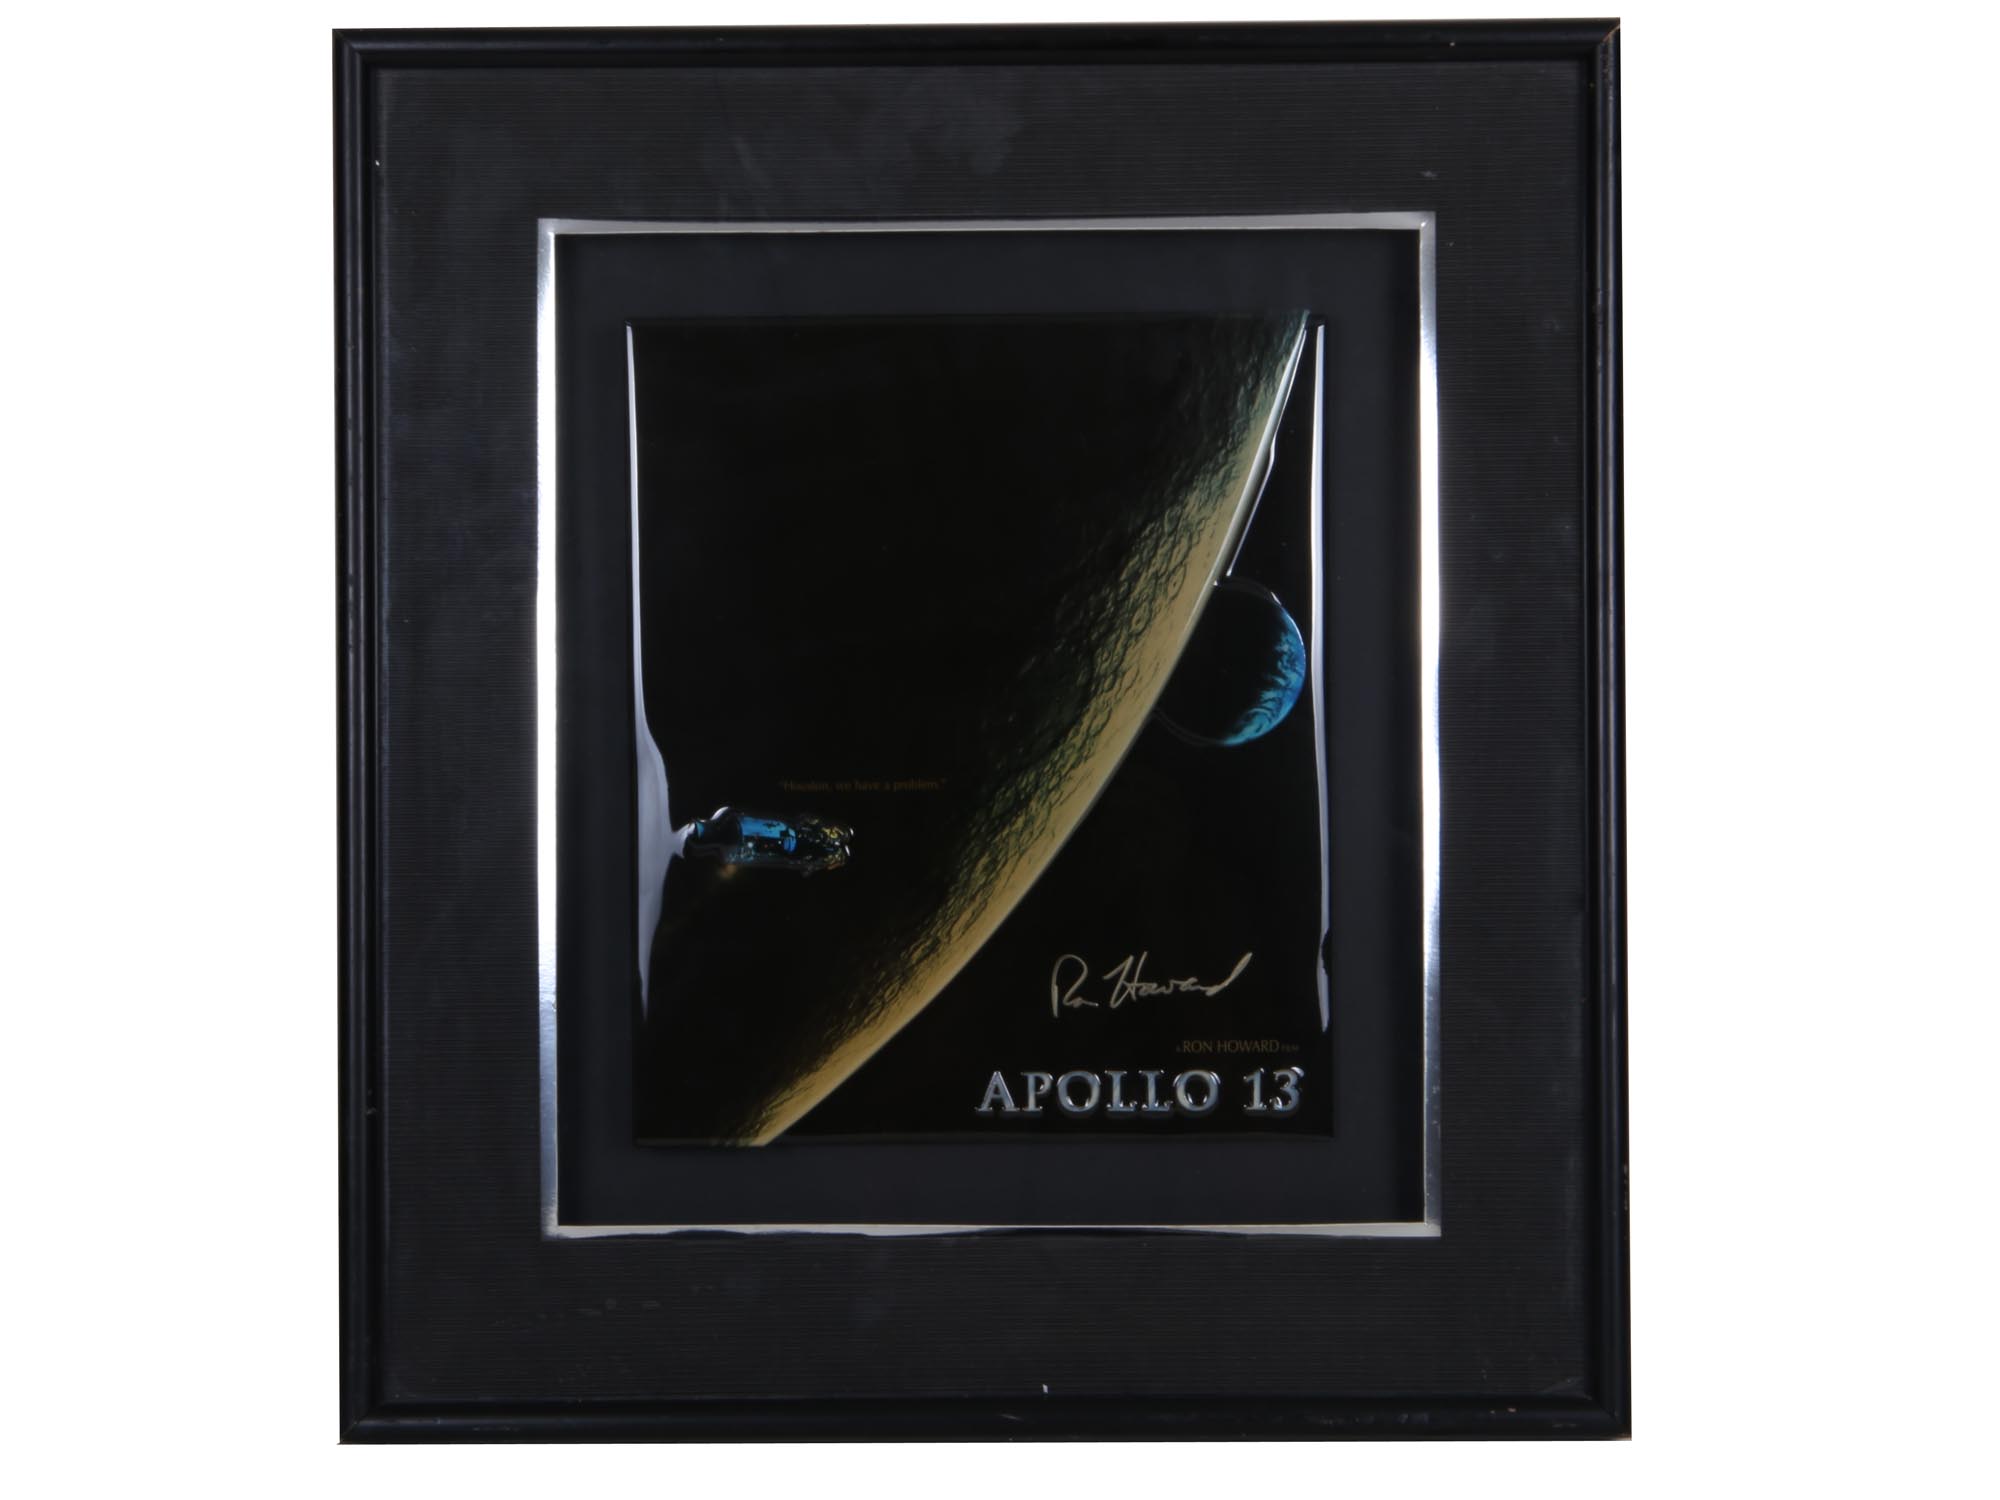 APOLLO 13 MOVIE POSTER SIGNED BY RON HOWARD PIC-0